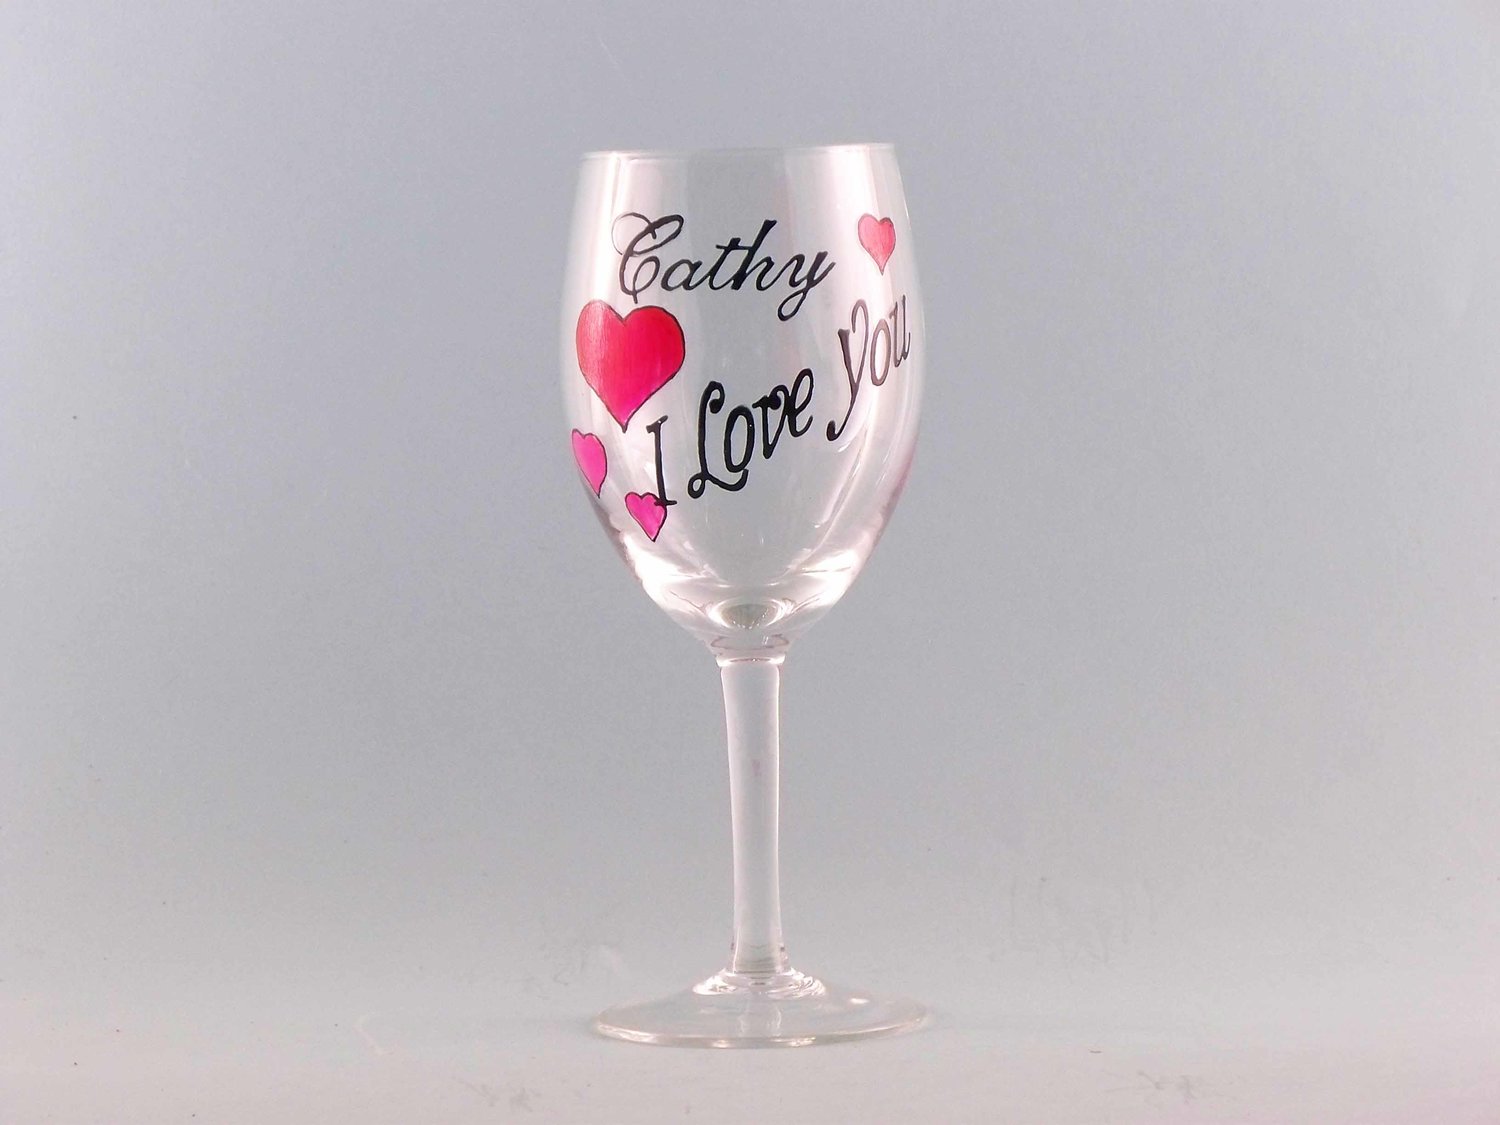 Cute DIY Valentine's Day Gift - Personalized Wine Glasses